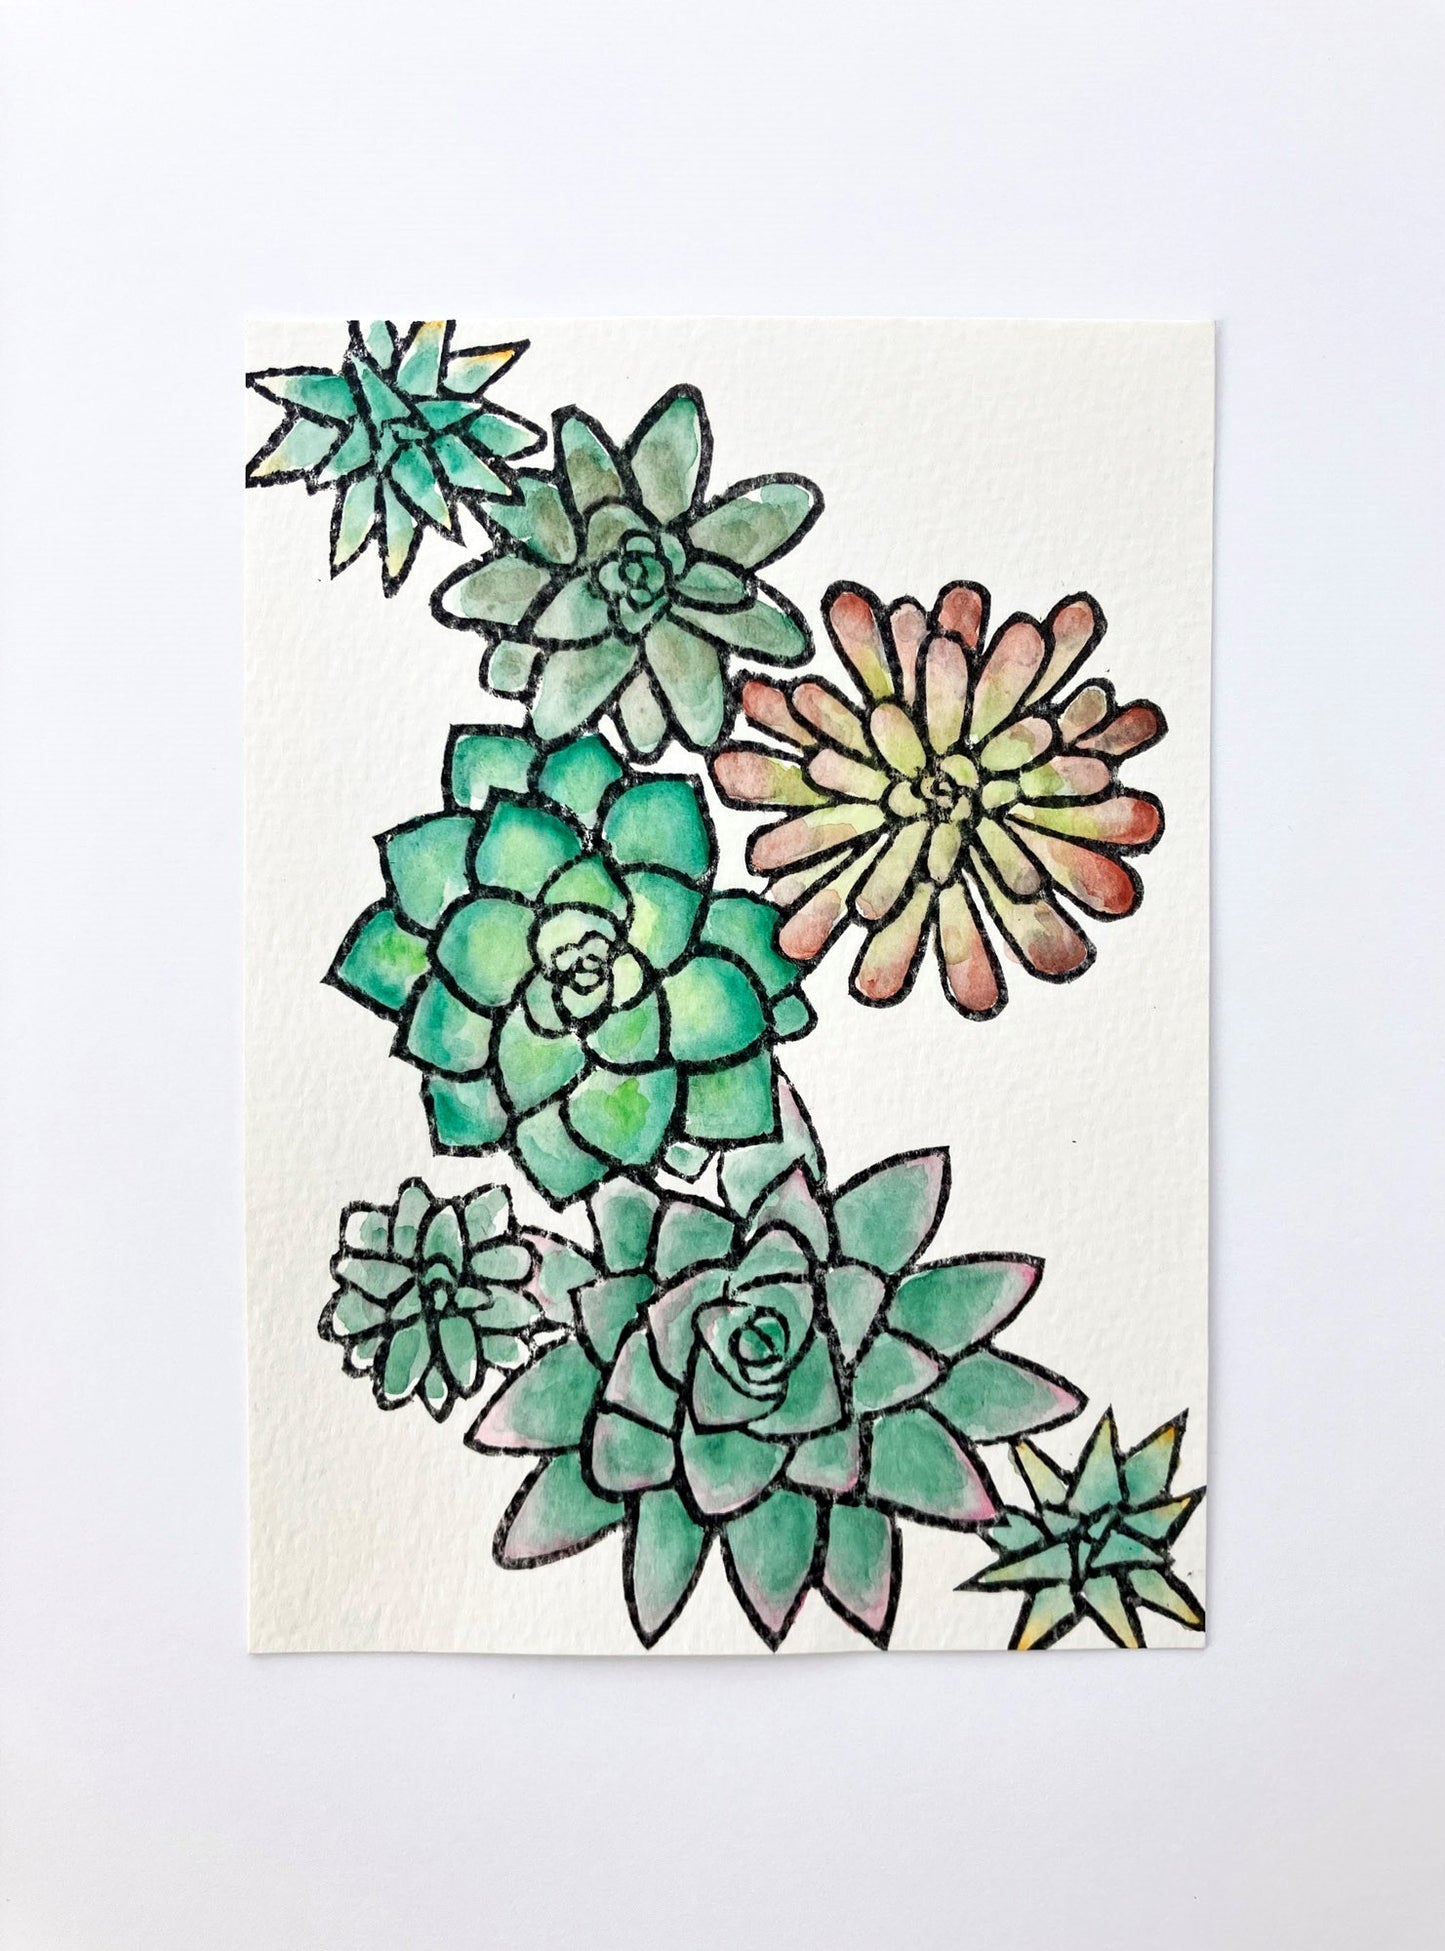 MOVING SALE - 5x7 Succulents Watercolor & Block Print - ONLY 1